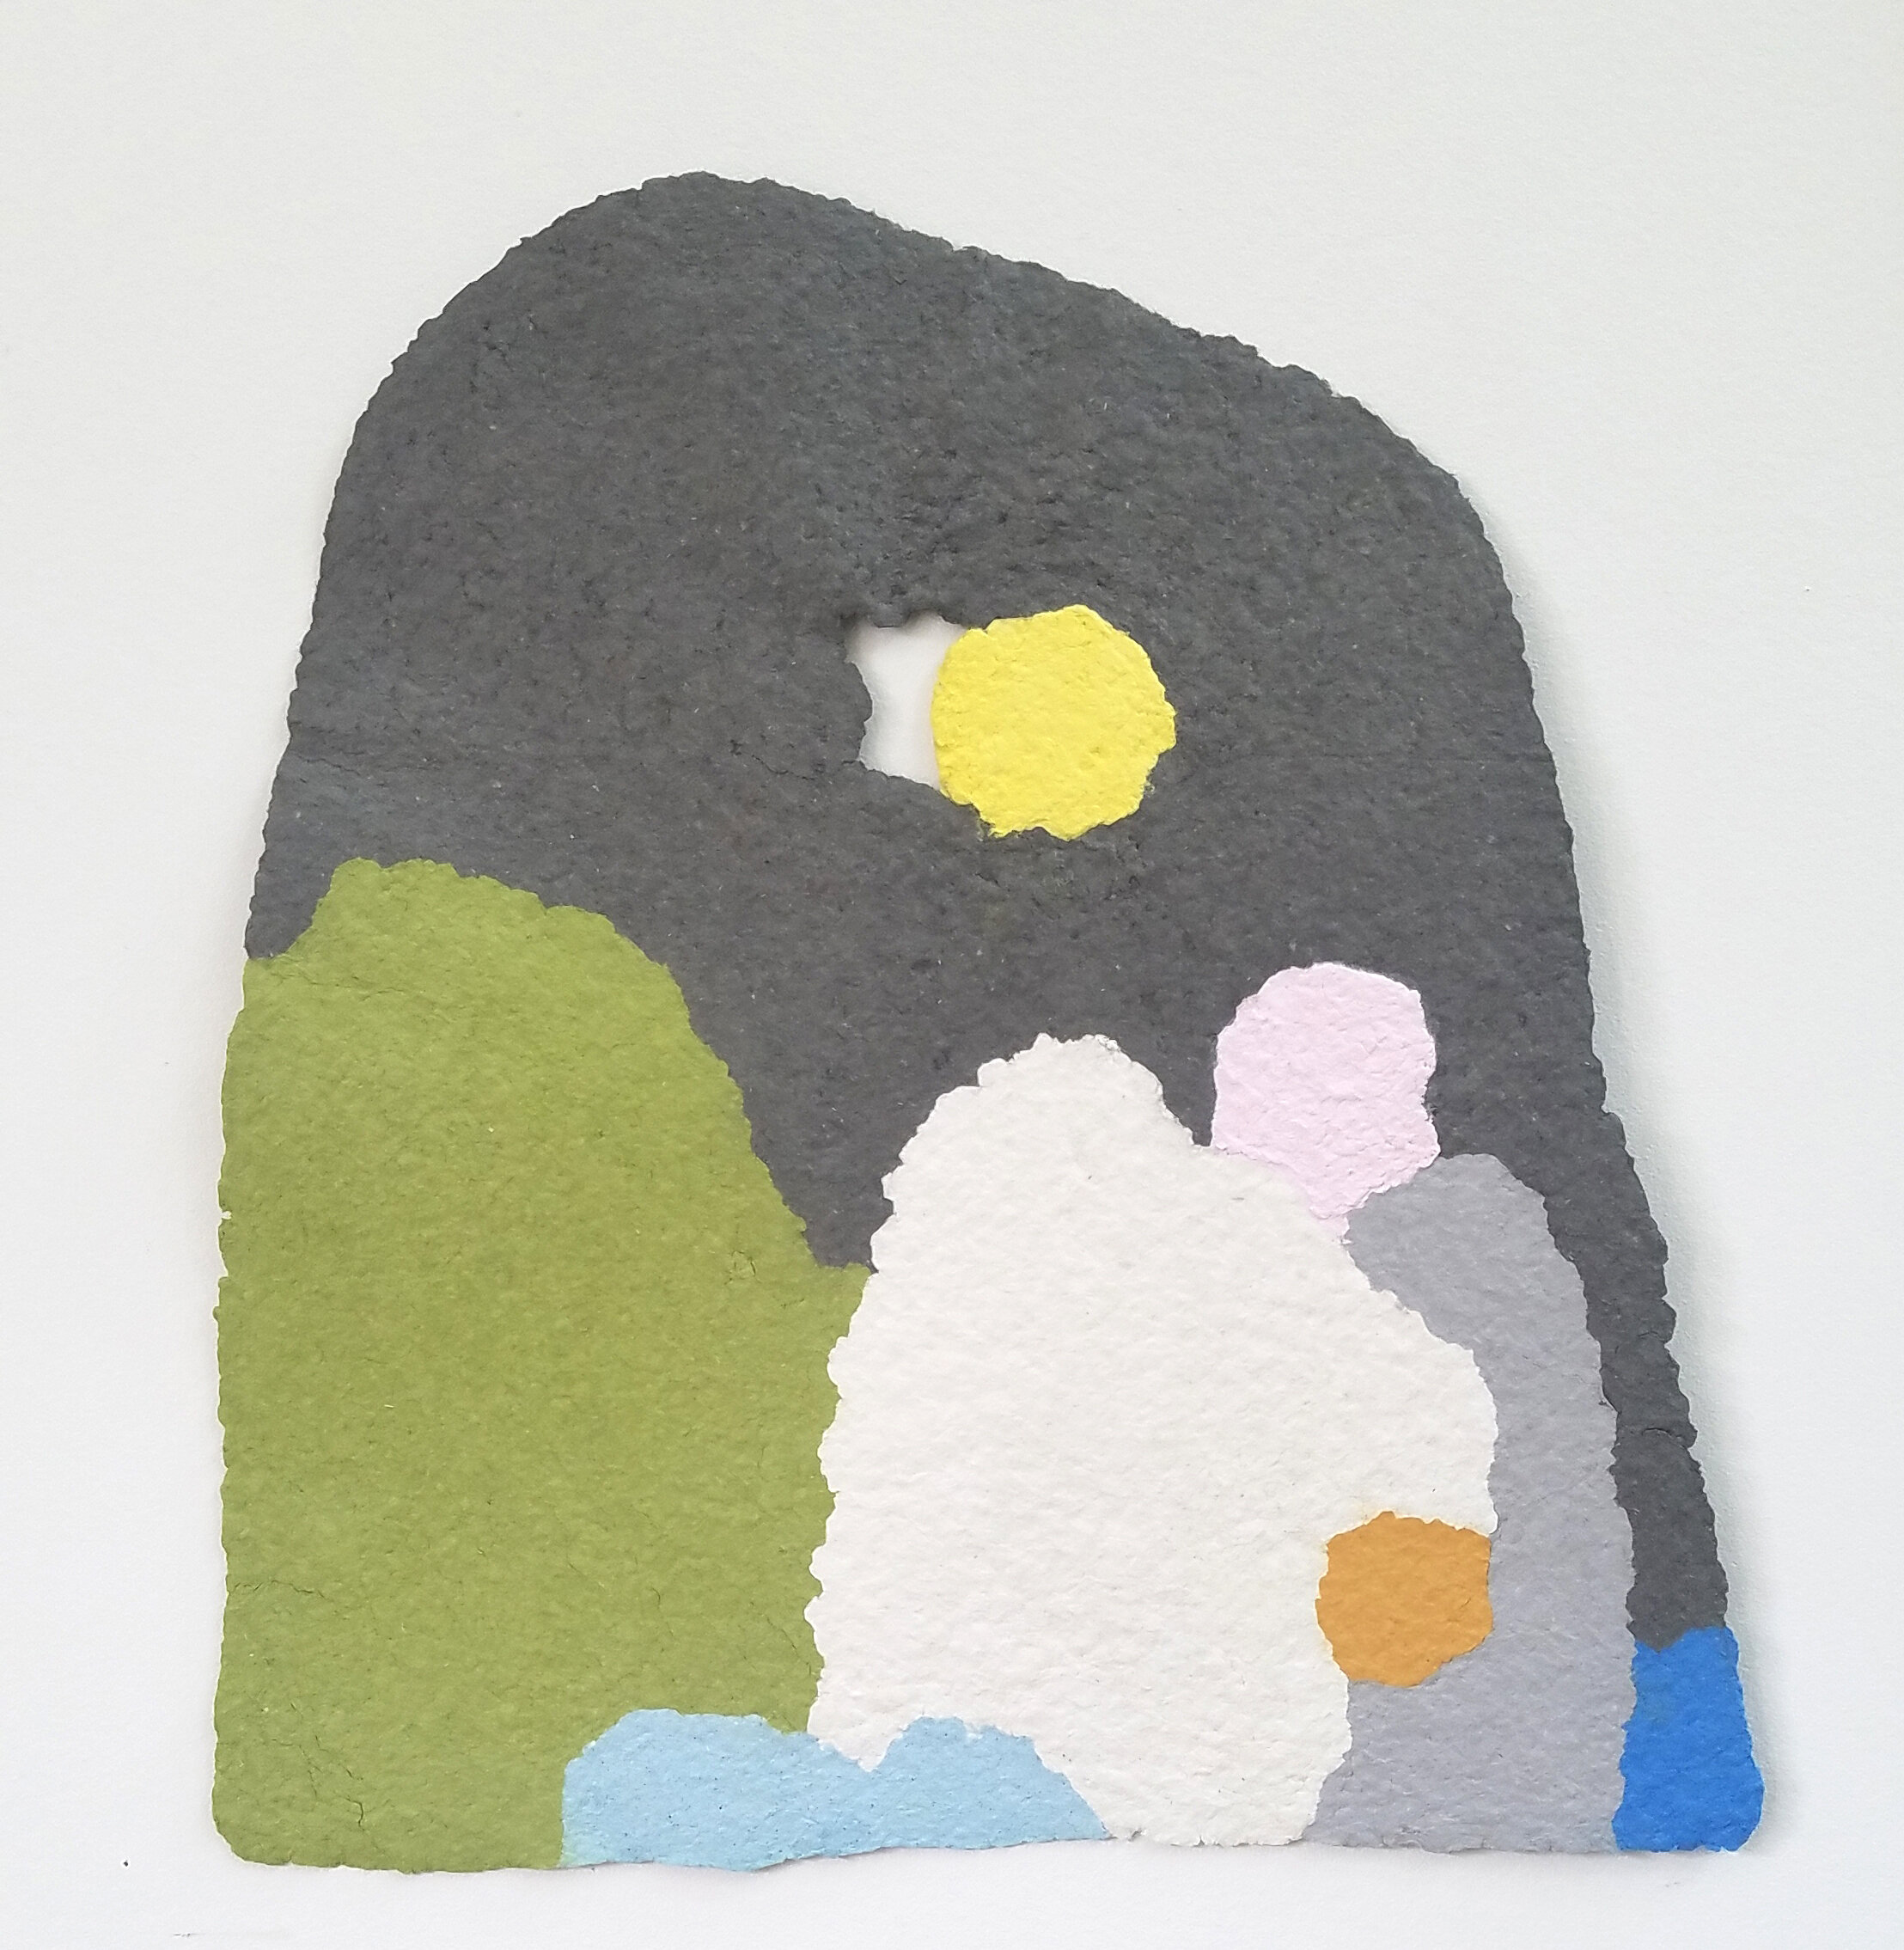   Namsan , 2018, cotton futon pulp painting, 16 x 19 inches (sold) 